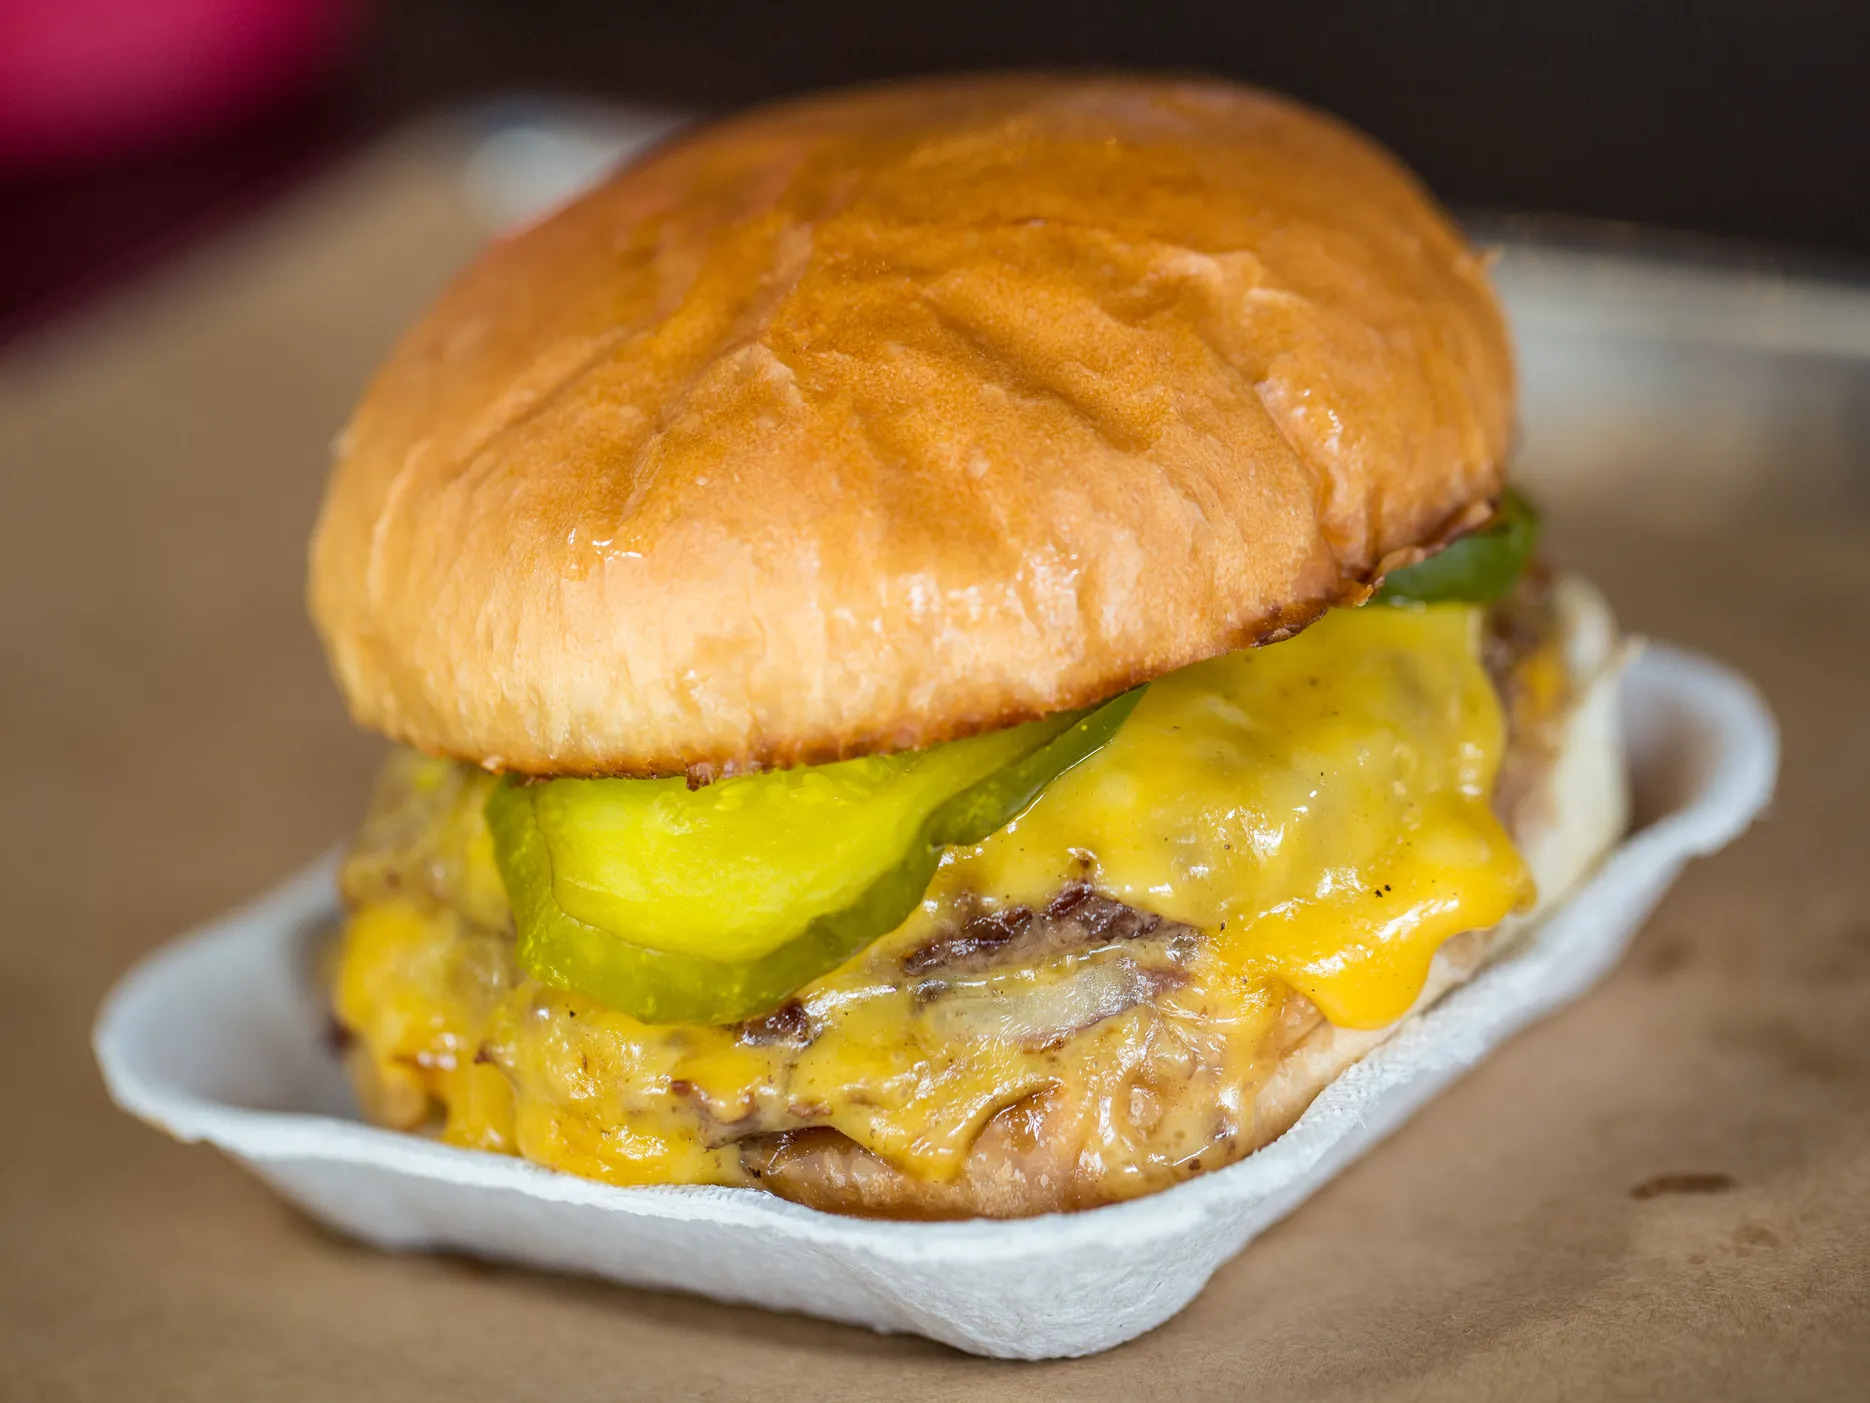 A cardboard plate holds a double patty burger covered in melted American cheese and topped with pickles on a plain, toasted bun. 